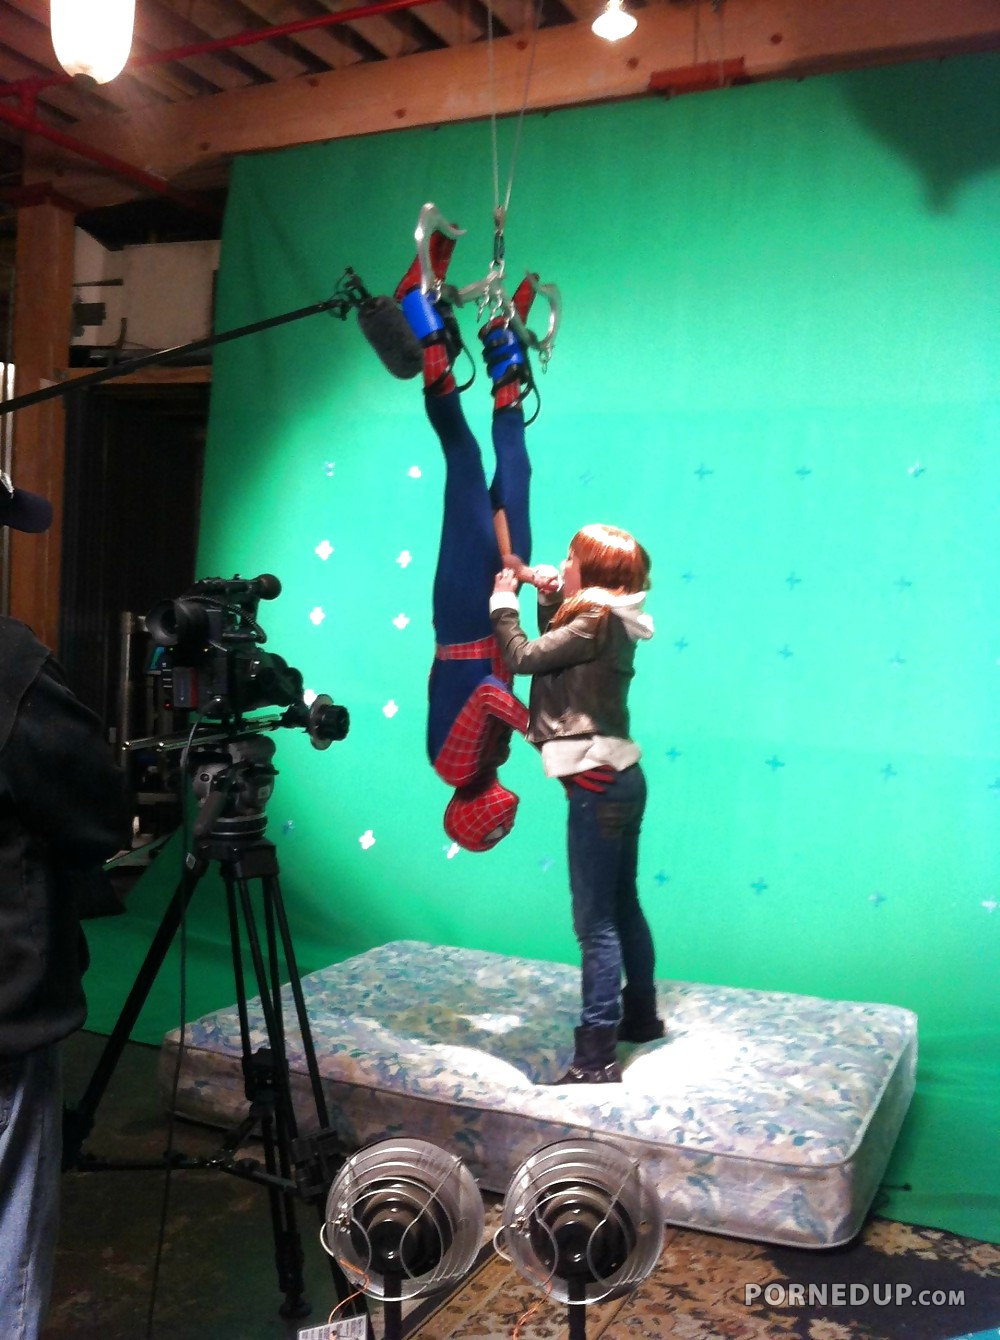 Spiderman Porn Blowjob - Spiderman Scene They Cut Out - Porned Up!